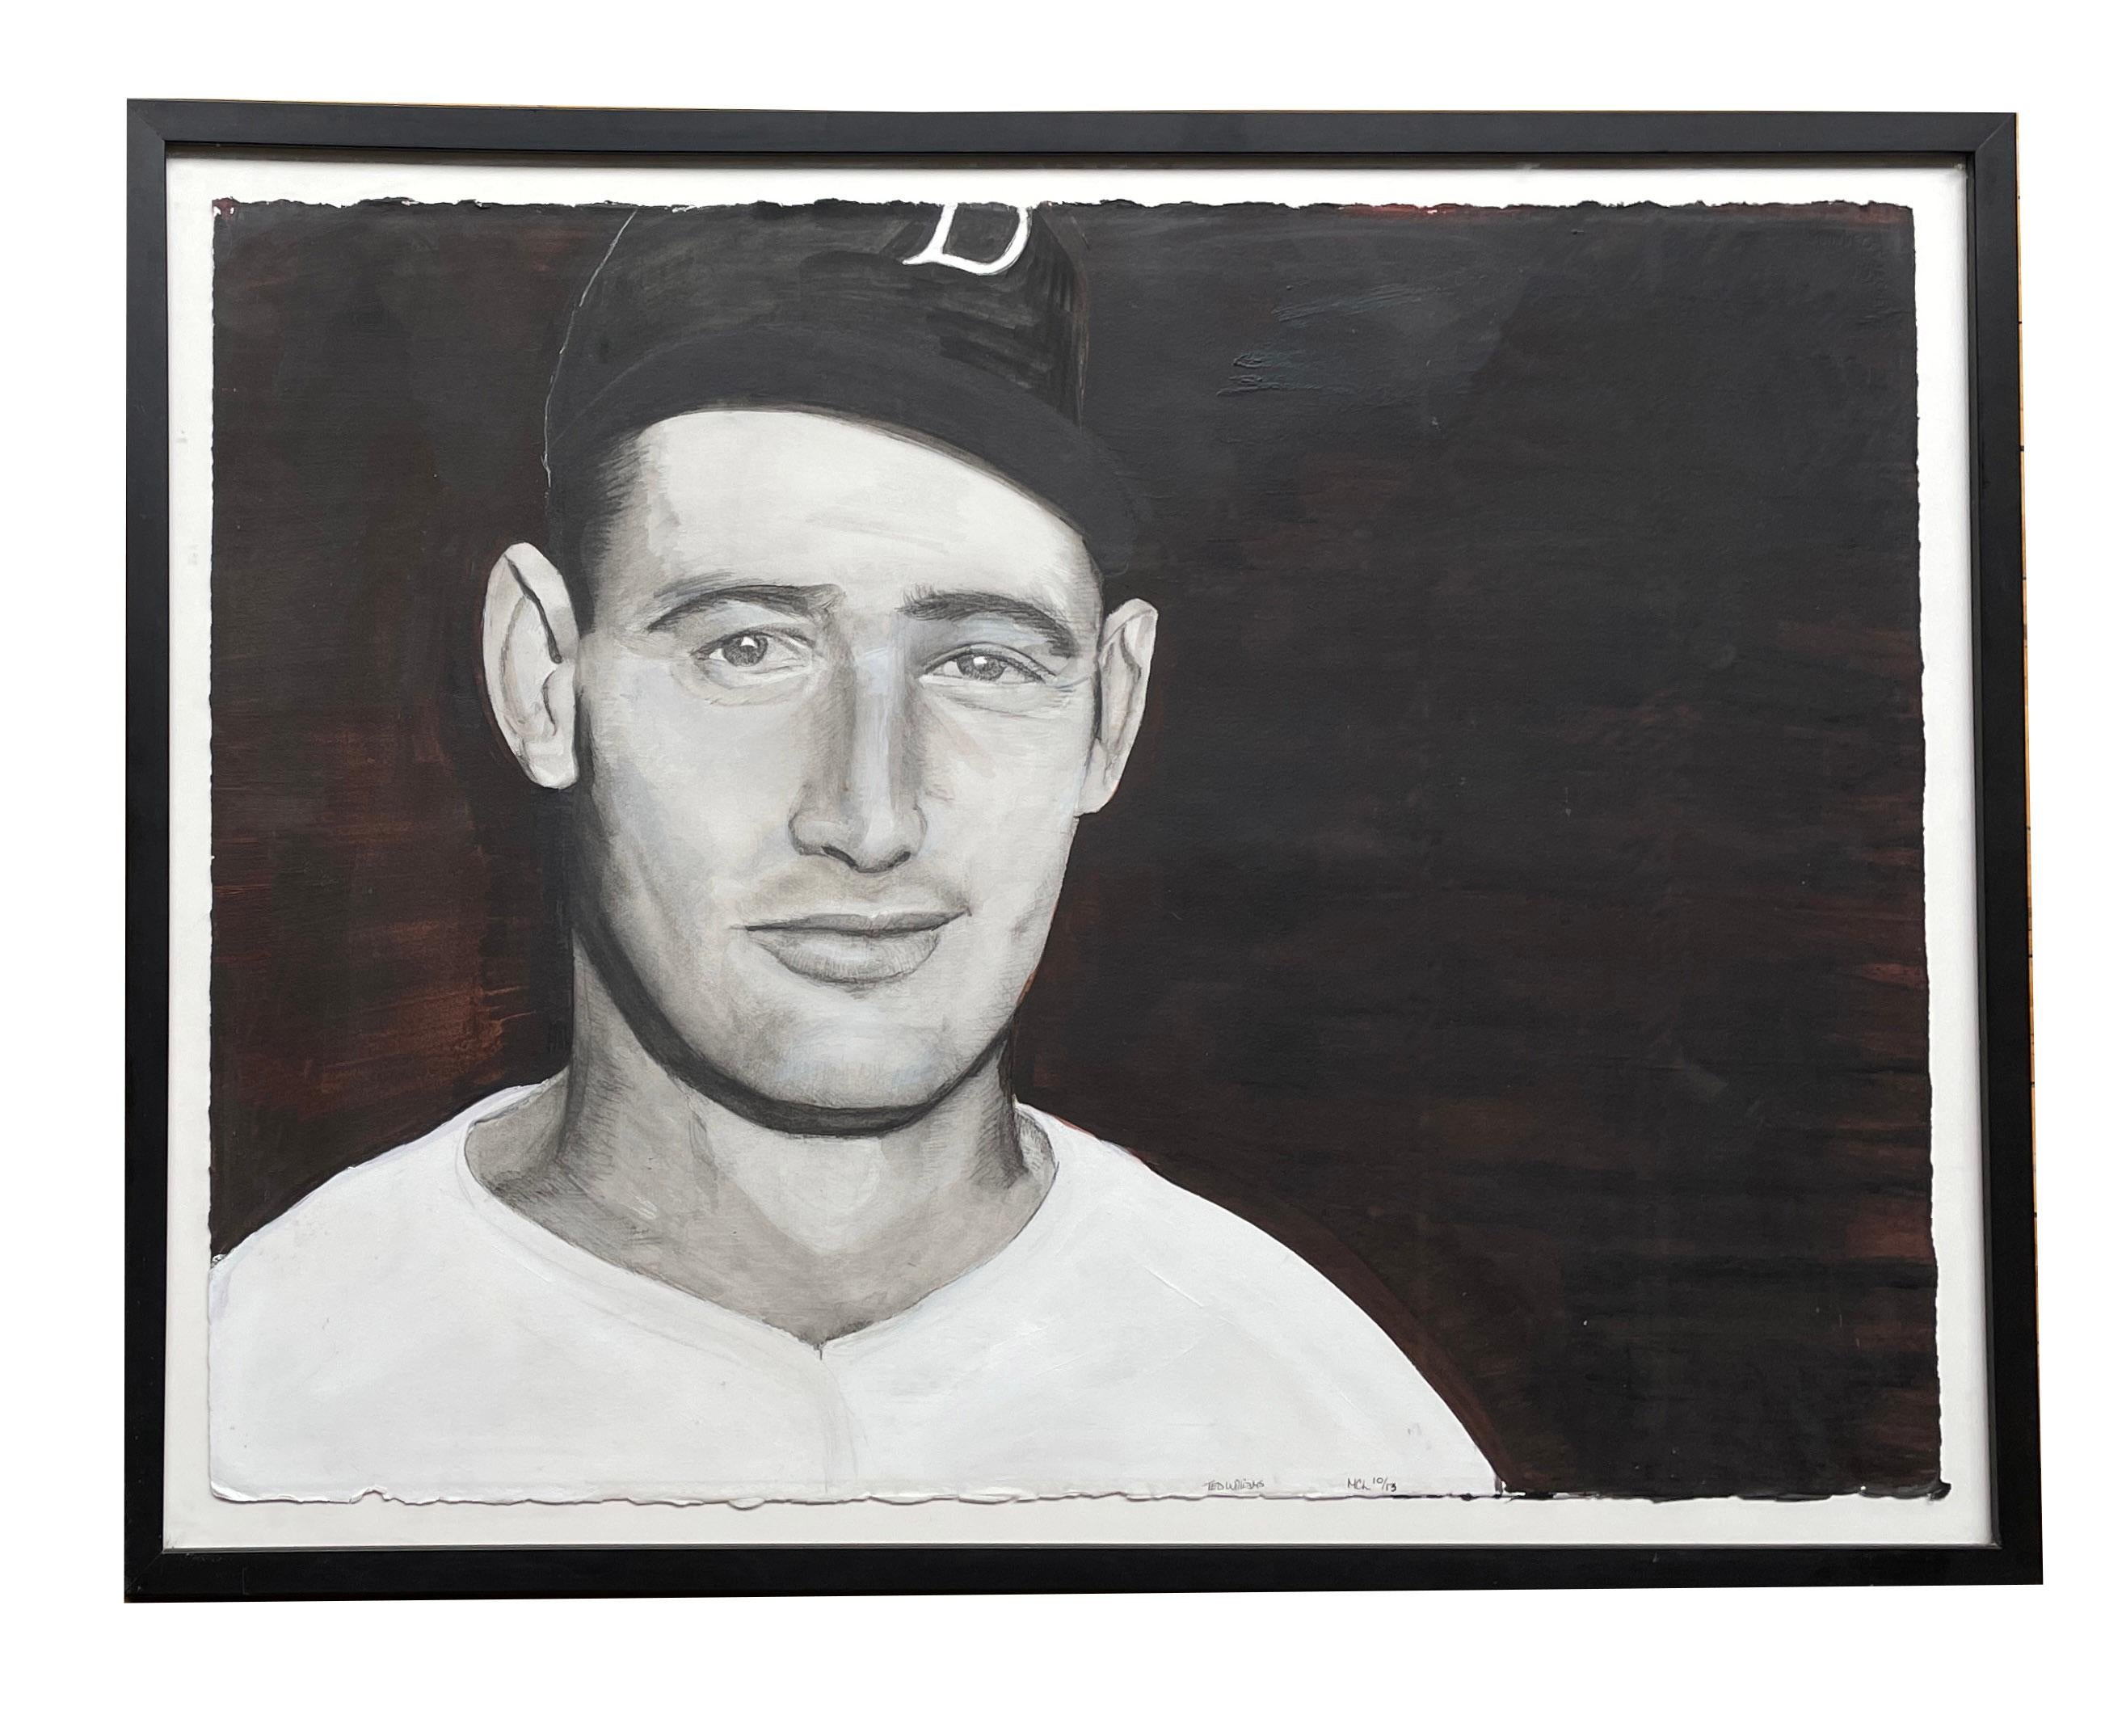 Ted Williams - Baseball Great, Outfielder for the Boston Red Sox, Framed - Painting by Margie Lawrence